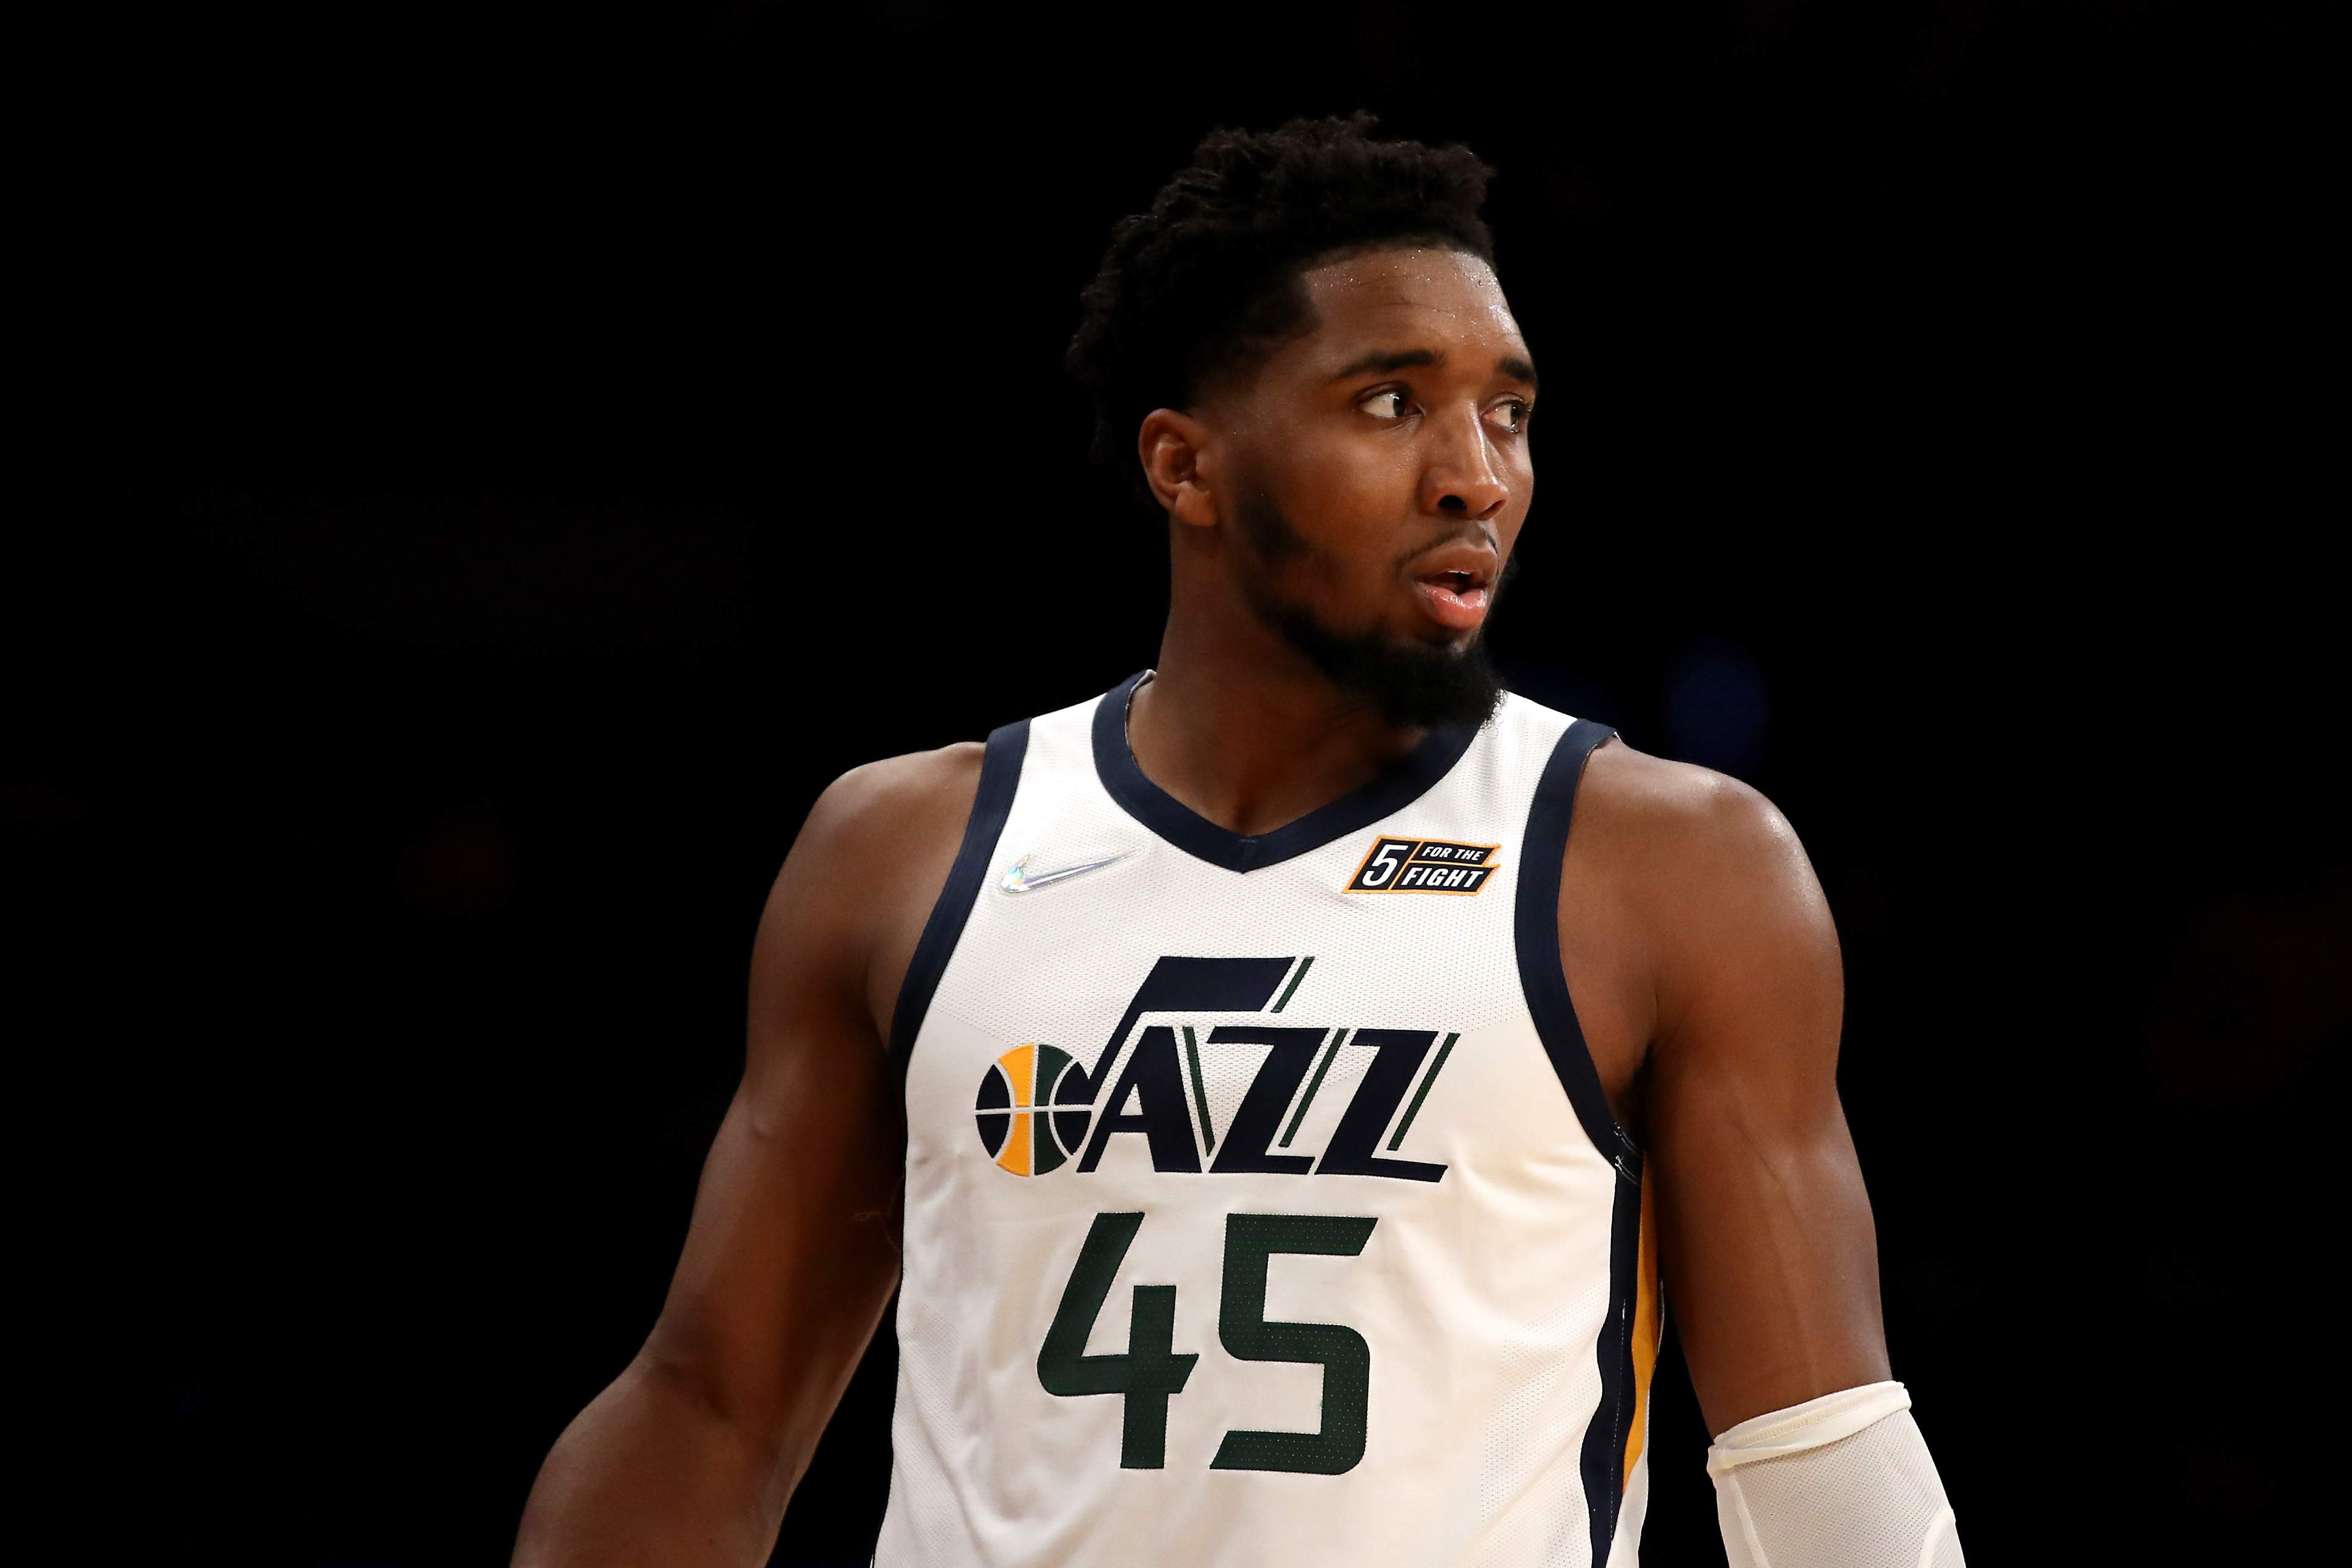 Donovan Mitchell #45 of the Utah Jazz looks on during the fourth quarter against the Los Angeles Lakers at Crypto.com Arena on January 17, 2022 in Los Angeles, California.